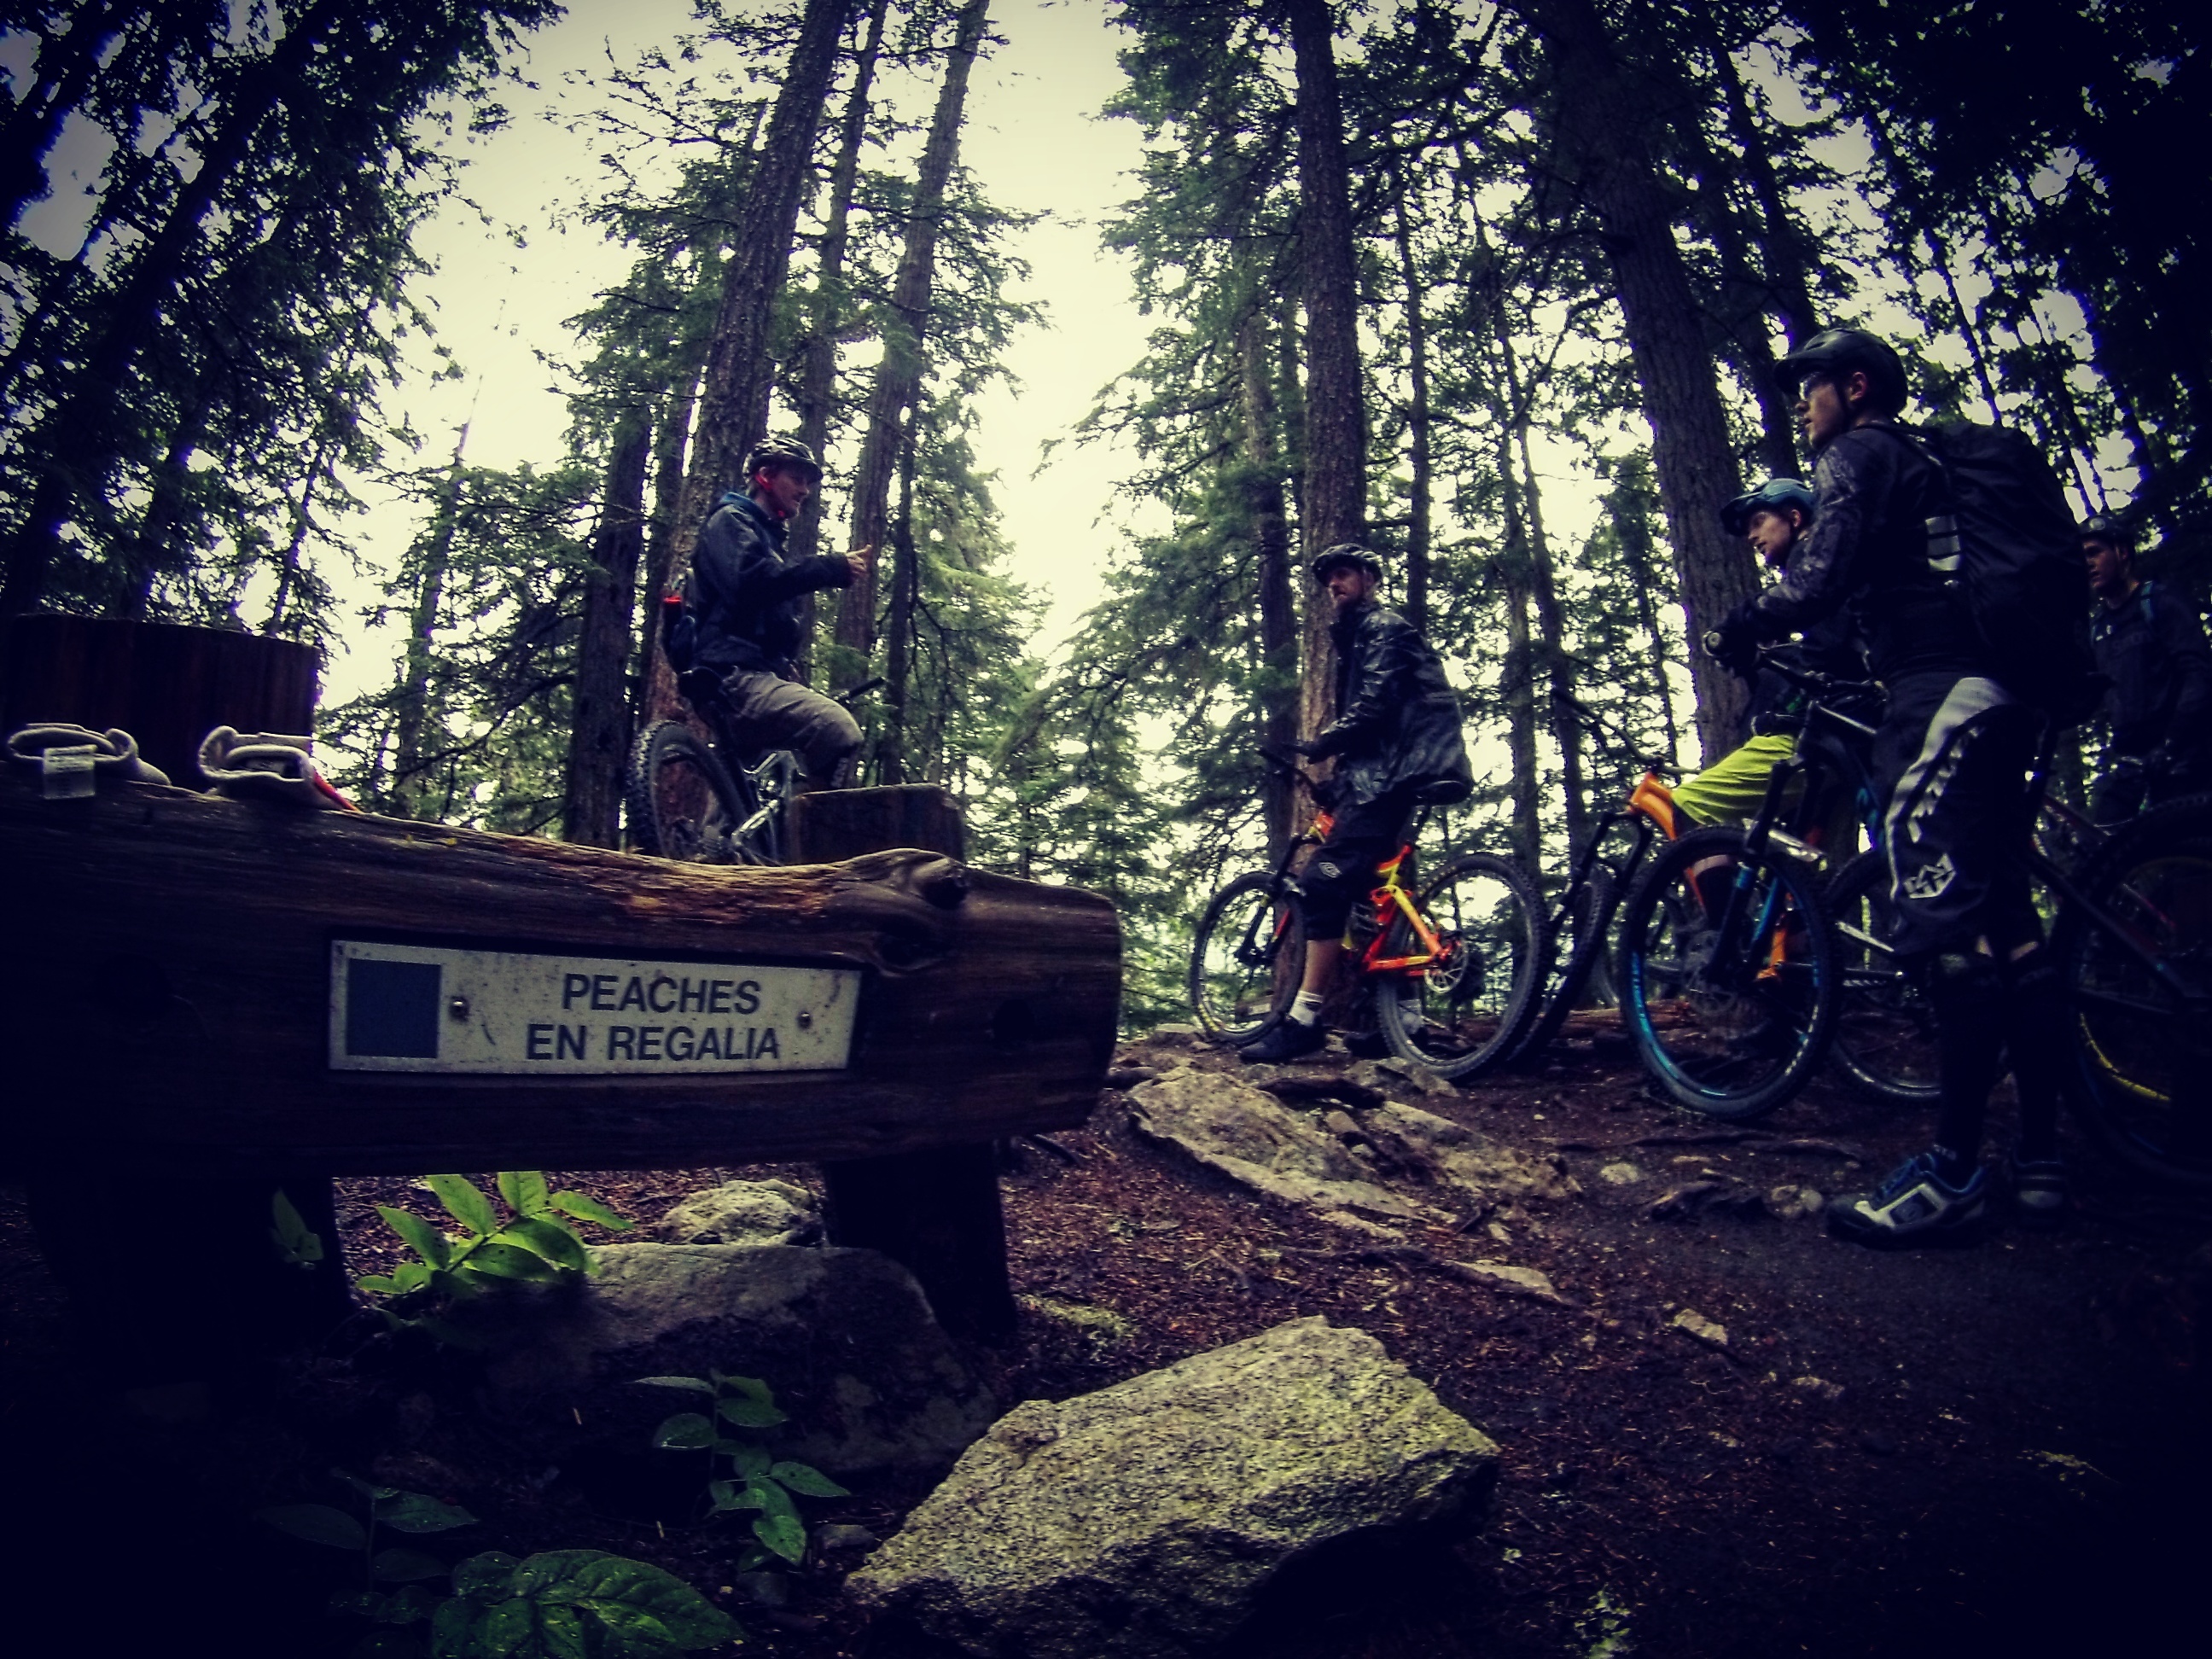 Bike Park Academy trainees riding the famous Lost Lake trails